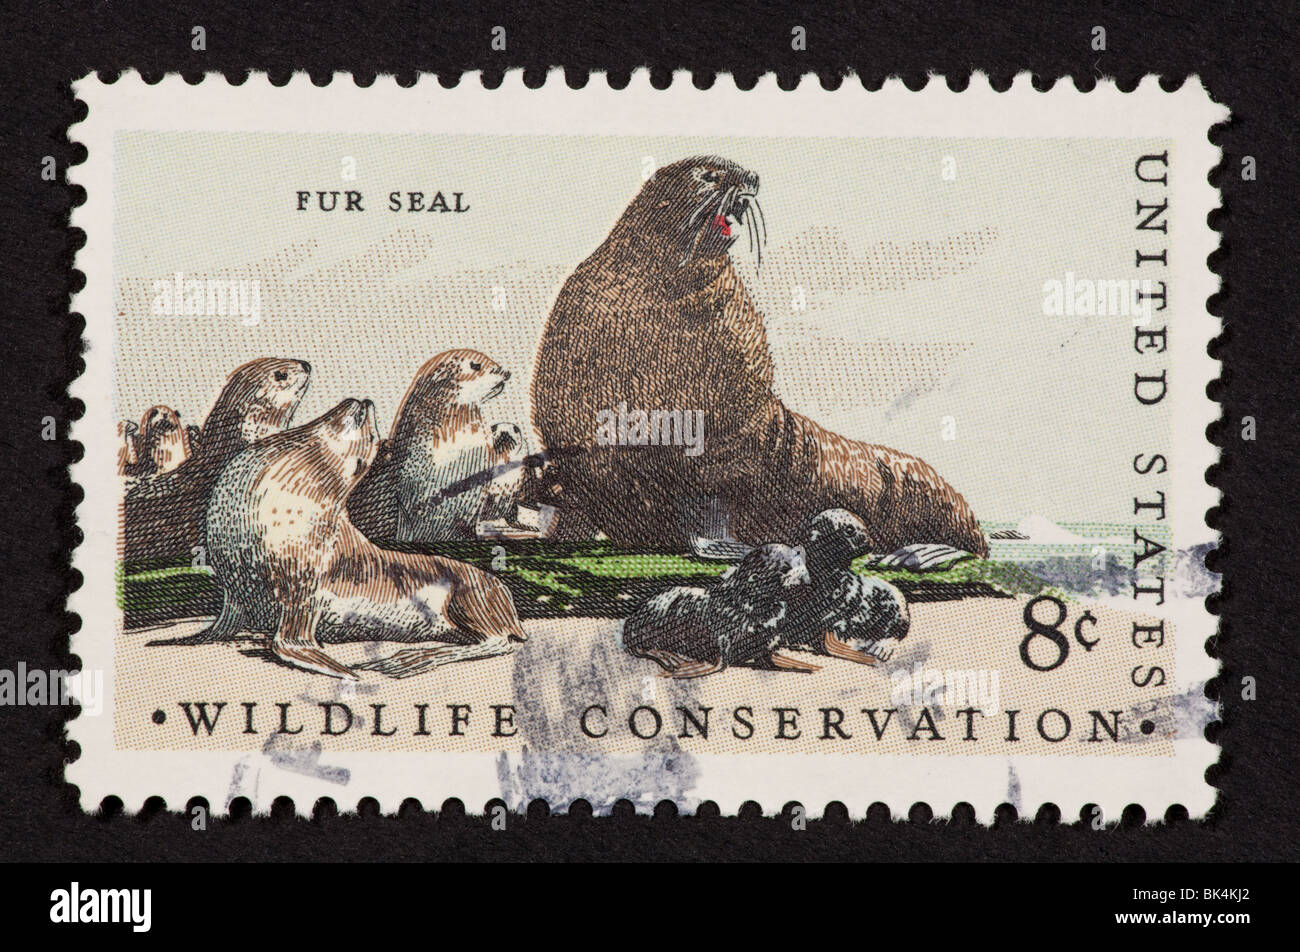 Postage stamp of the United States depicting a northern fur seal with pups (Callorhinus ursinus). Stock Photo